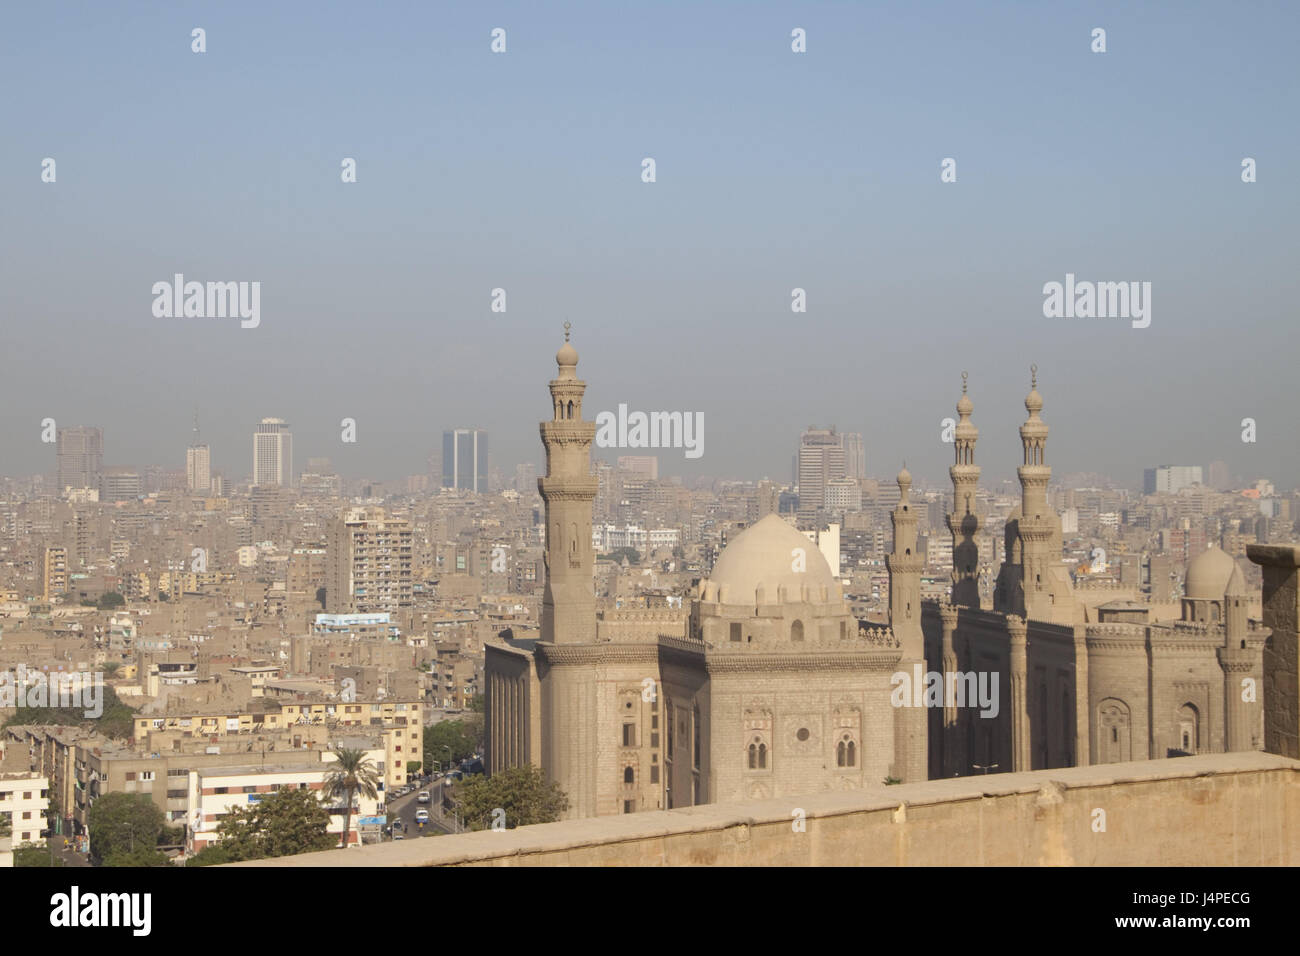 Egypt, Cairo, mosque, town overview, town, building, dome, minarets, faith, religion, Islam, houses, high rises, flats, heavens, grey, Stock Photo